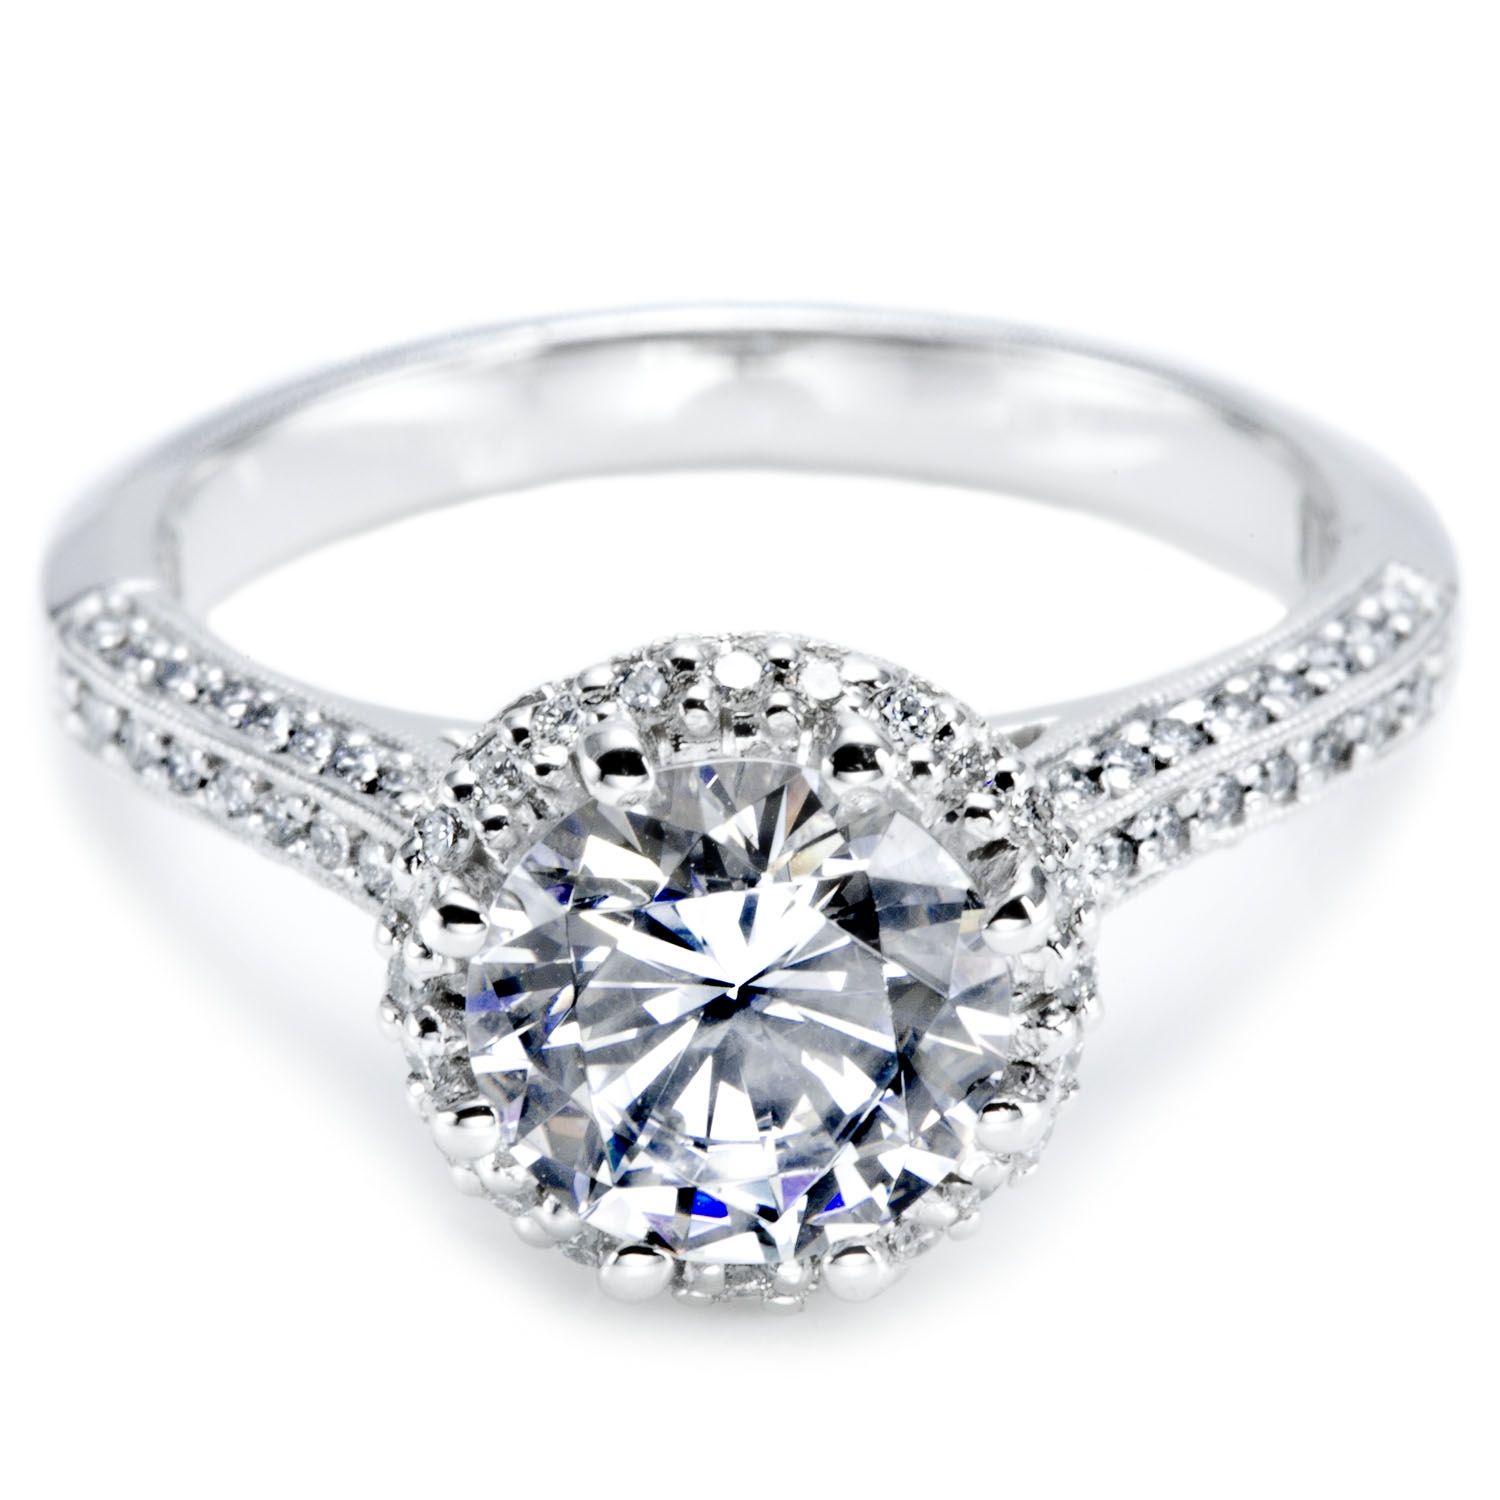 Engagement Rings | At James & Sons Fine Jewelers | Chicagoland Area Regarding Chicago Wedding Rings (View 14 of 15)